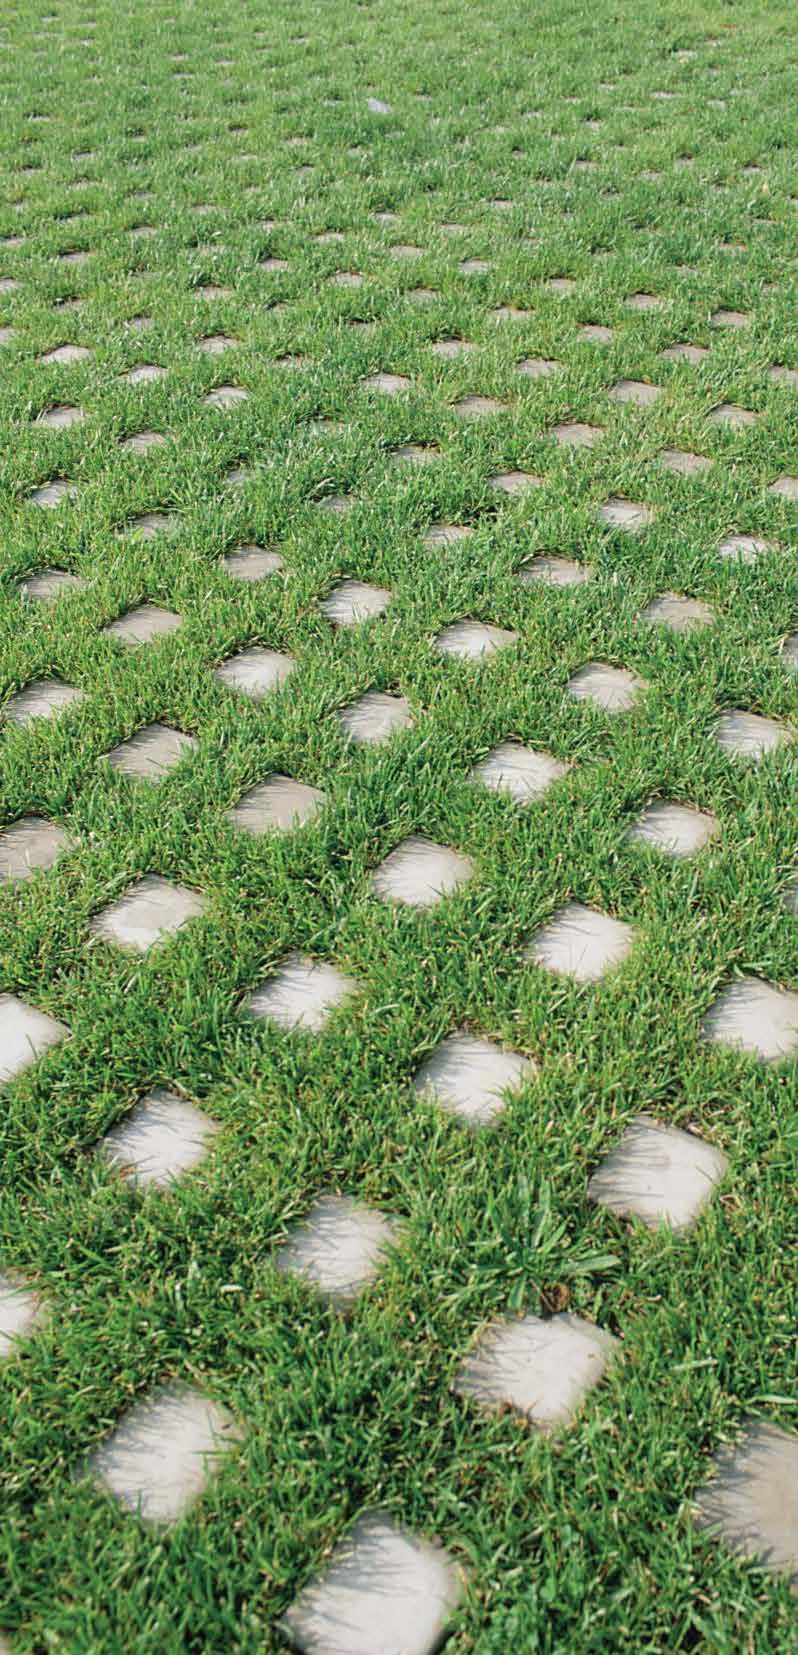 Each unit provides a 75% grass to concrete ratio, ensuring a green turf that supports